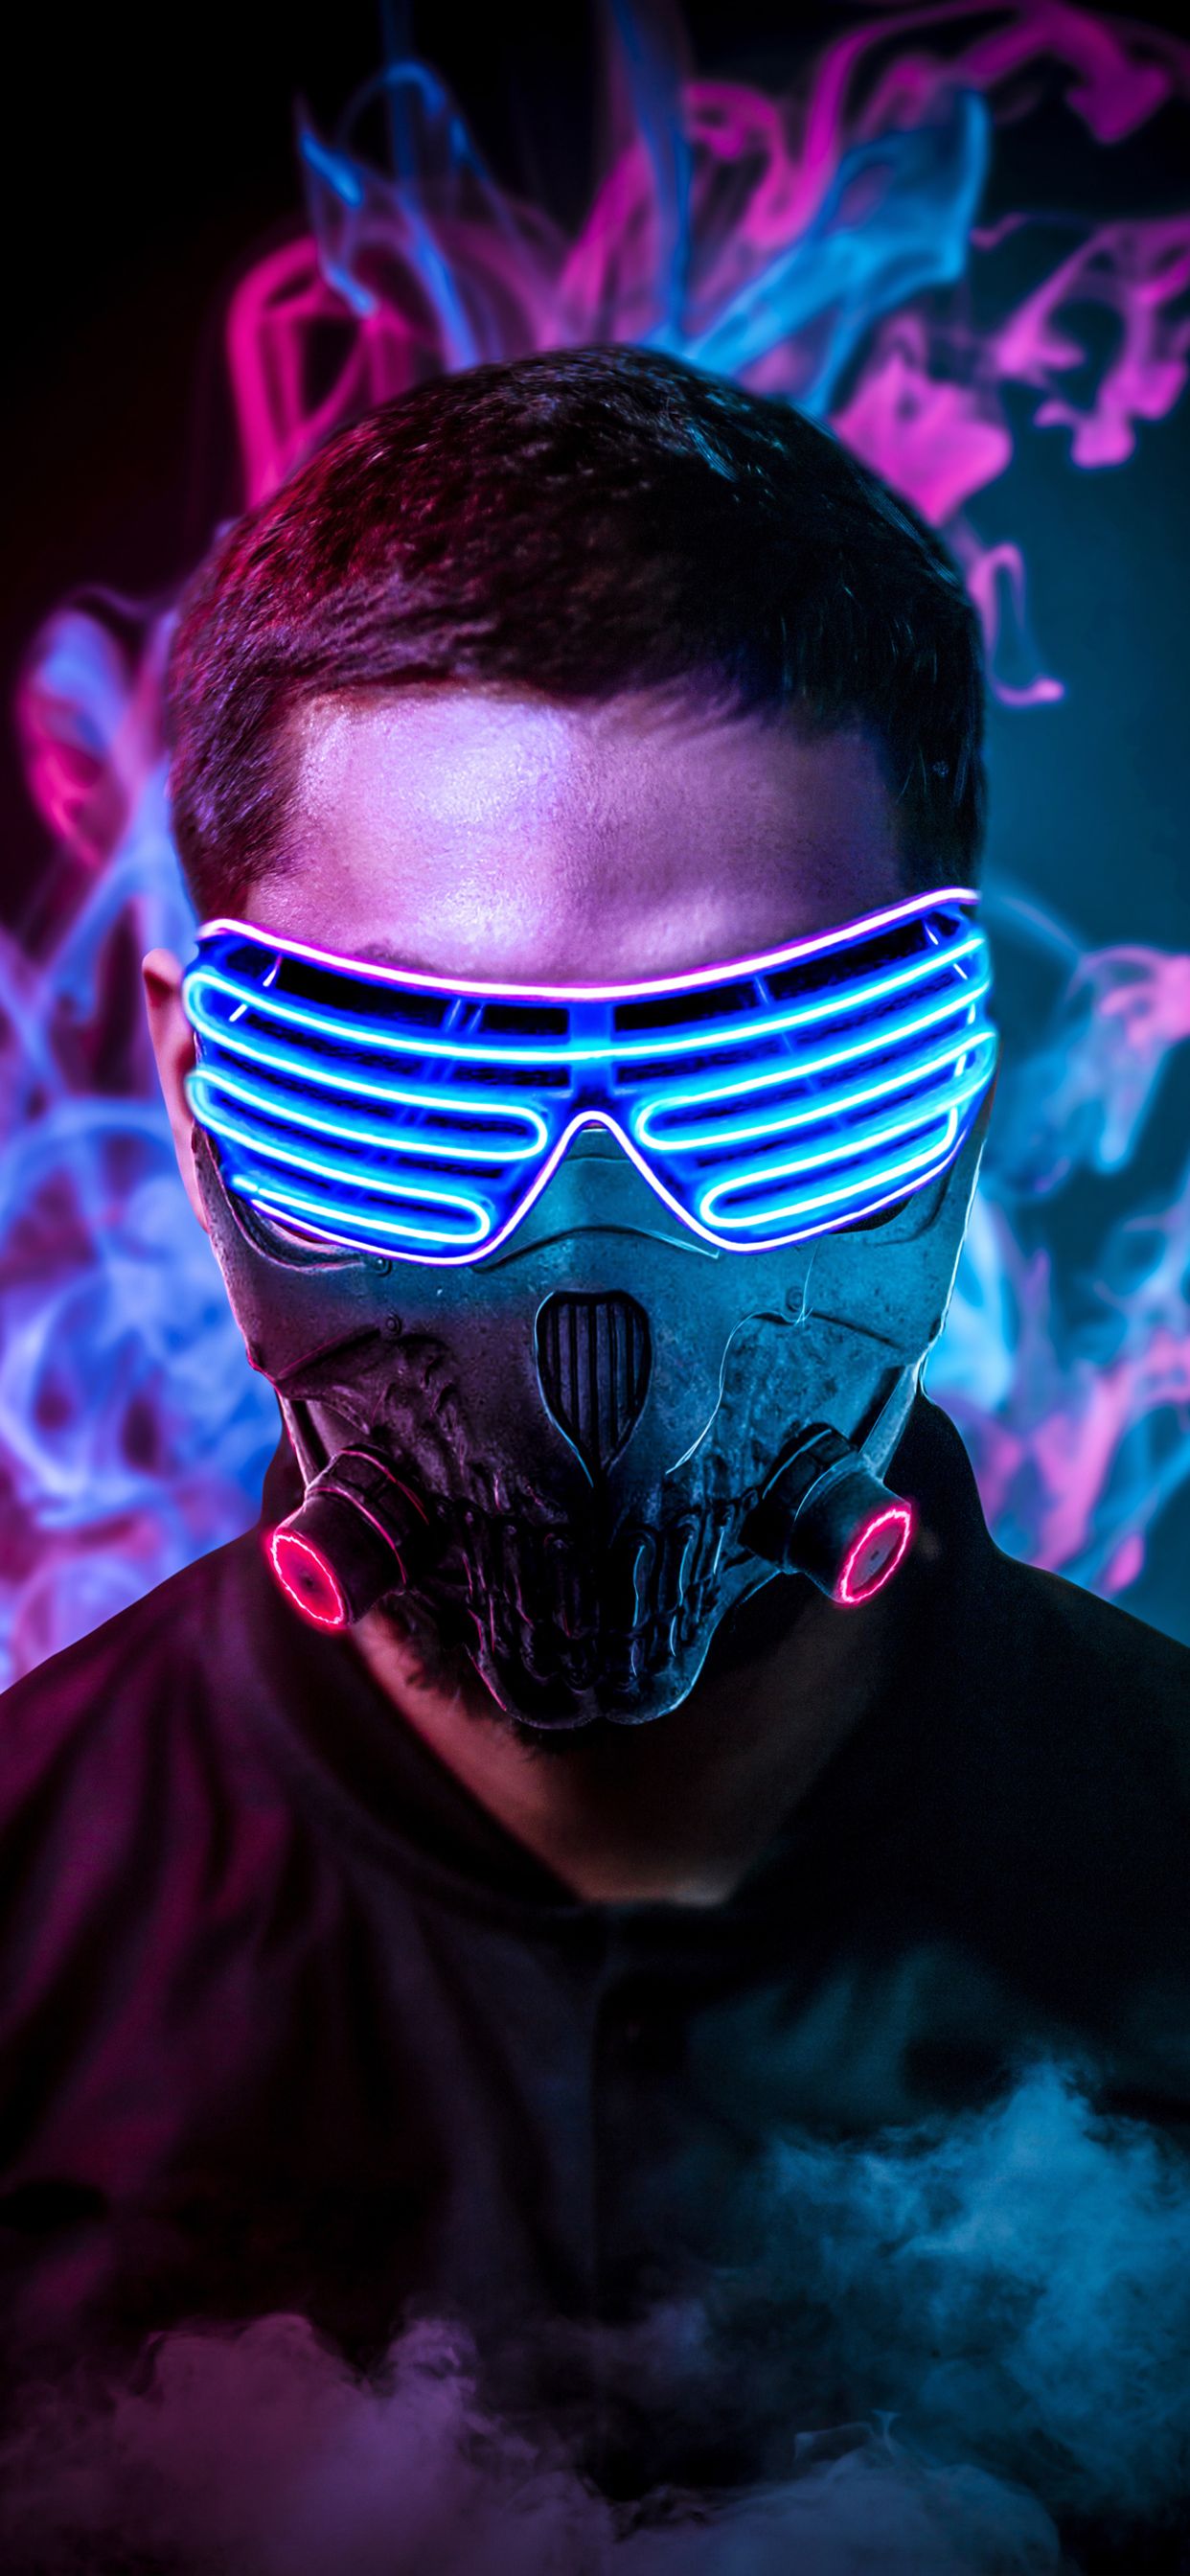 Mask Neon 4k iPhone XS MAX HD 4k Wallpaper, Image, Background, Photo and Picture